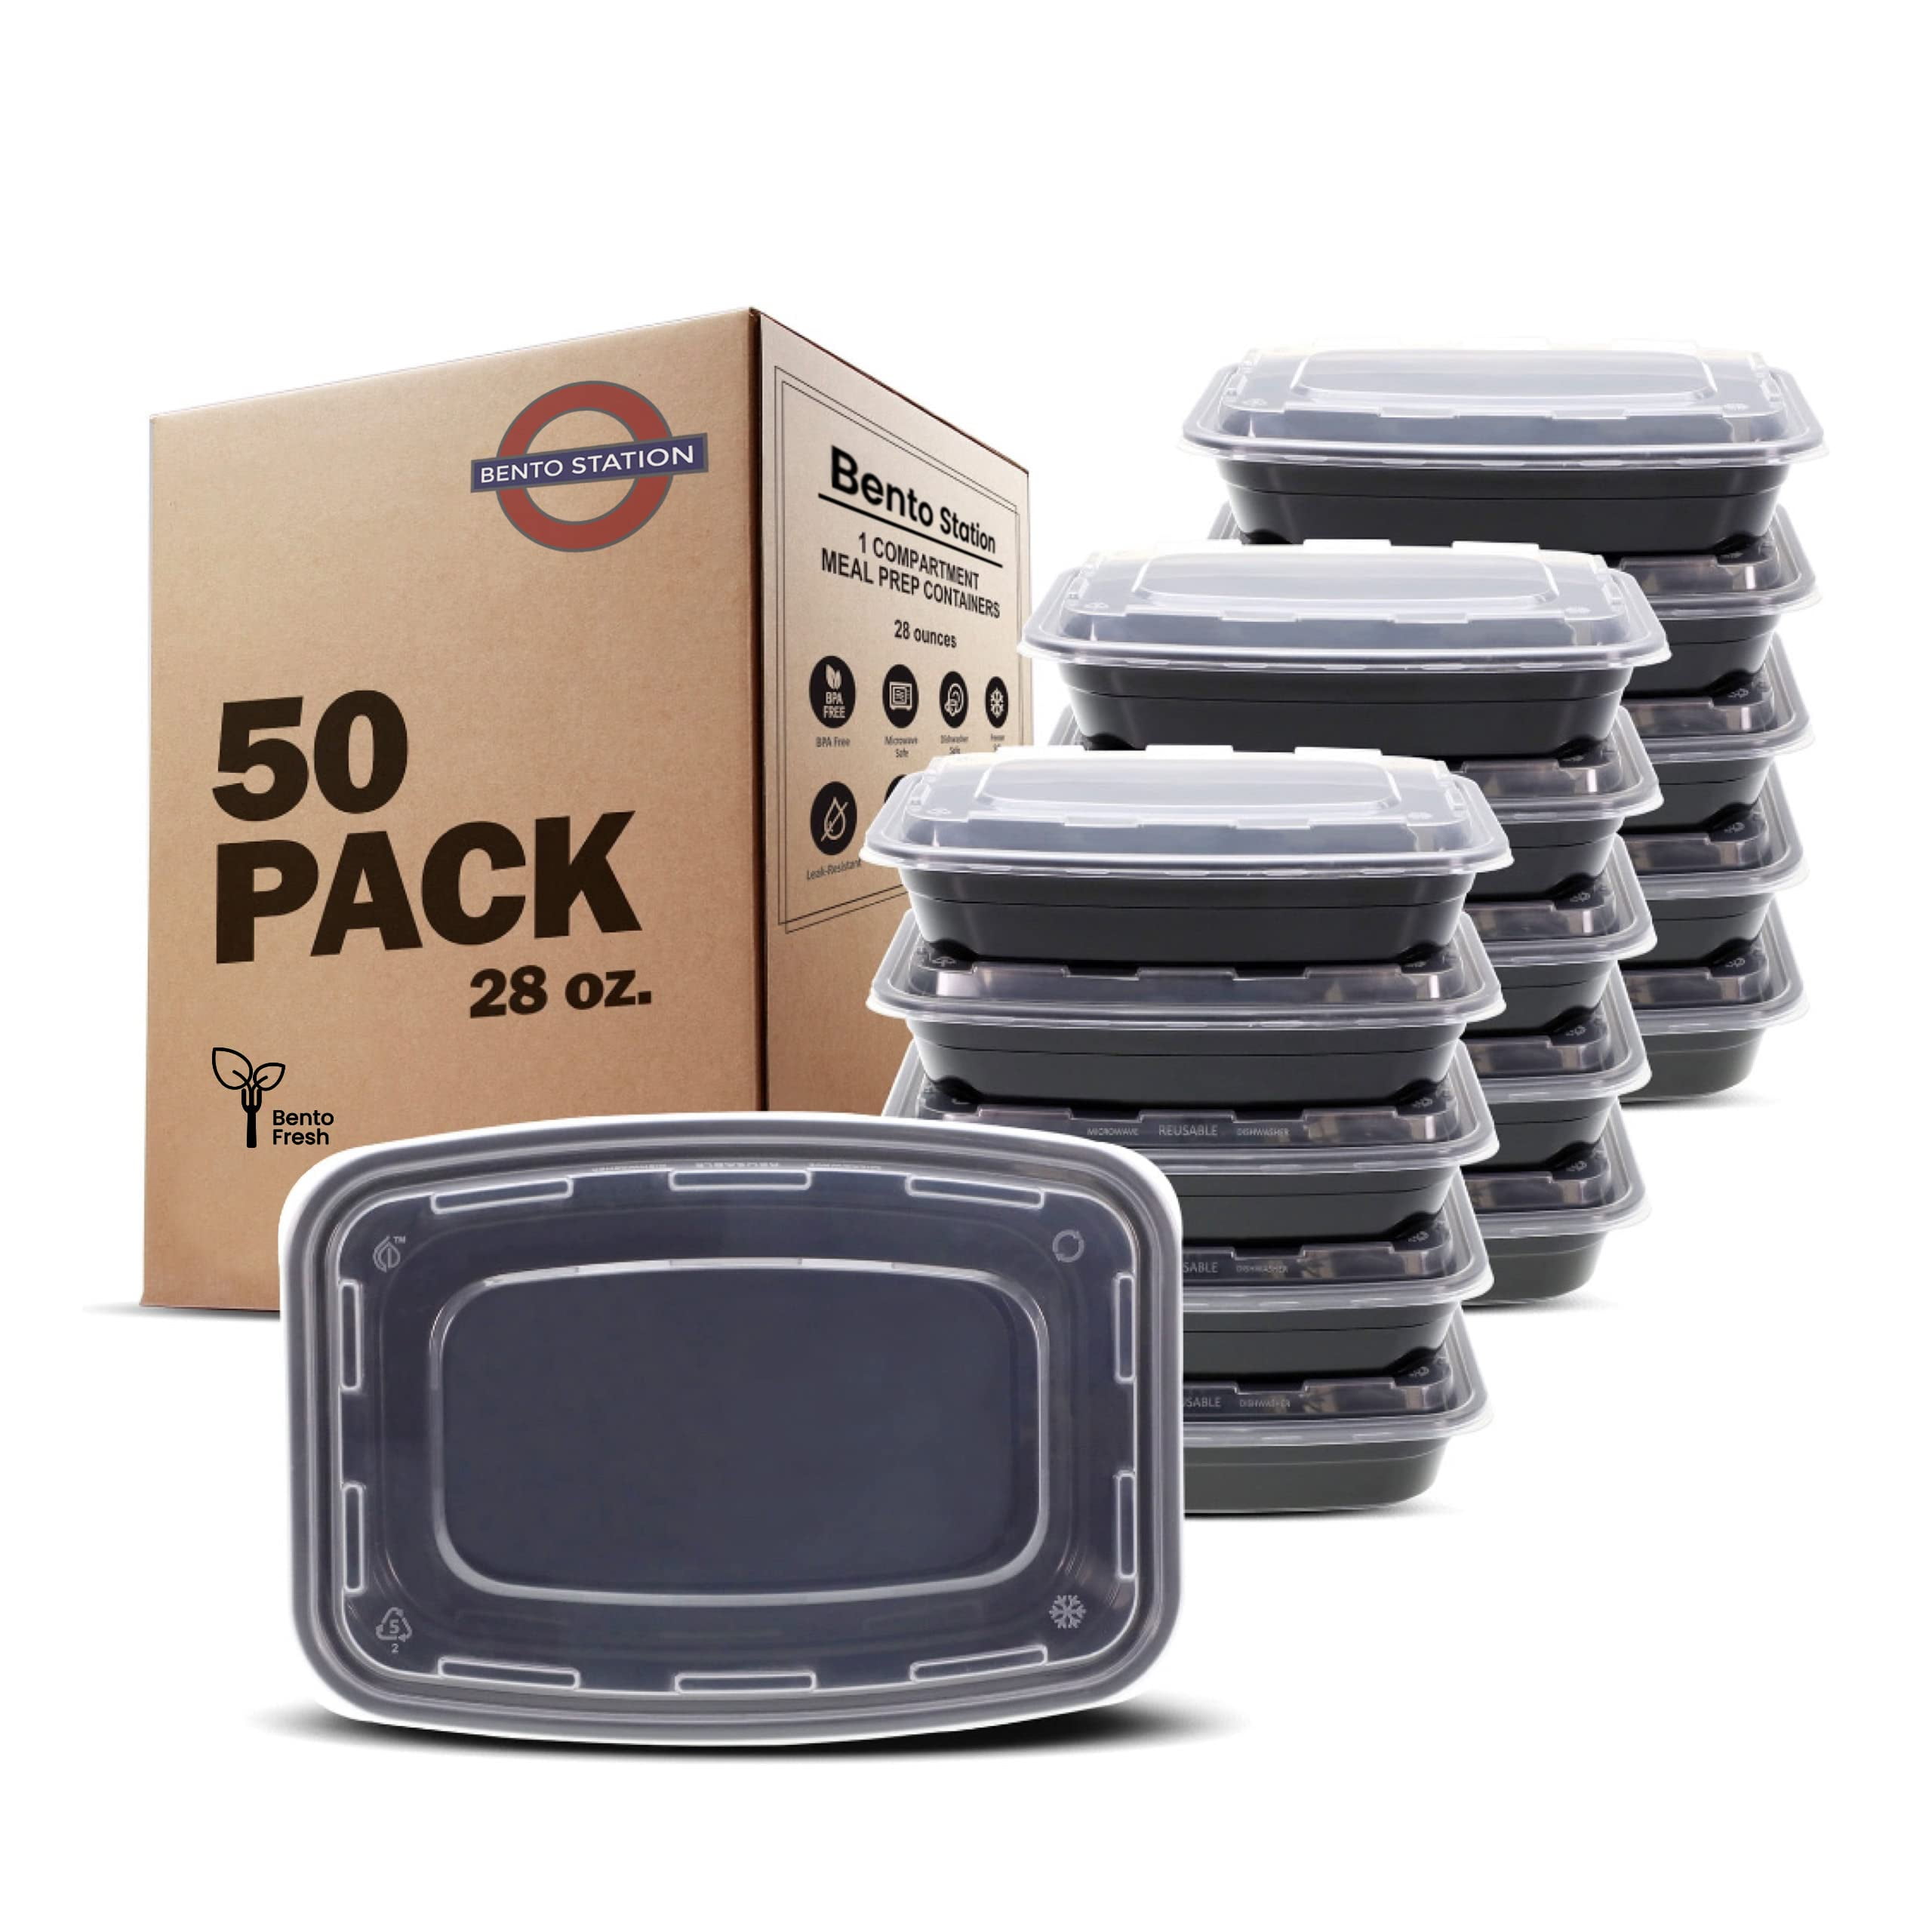 Asporto 34 oz Black Plastic 4 Compartment Food Container - with Clear Lid,  Microwavable - 8 3/4 x 7 1/2 x 1 1/2 - 100 count box